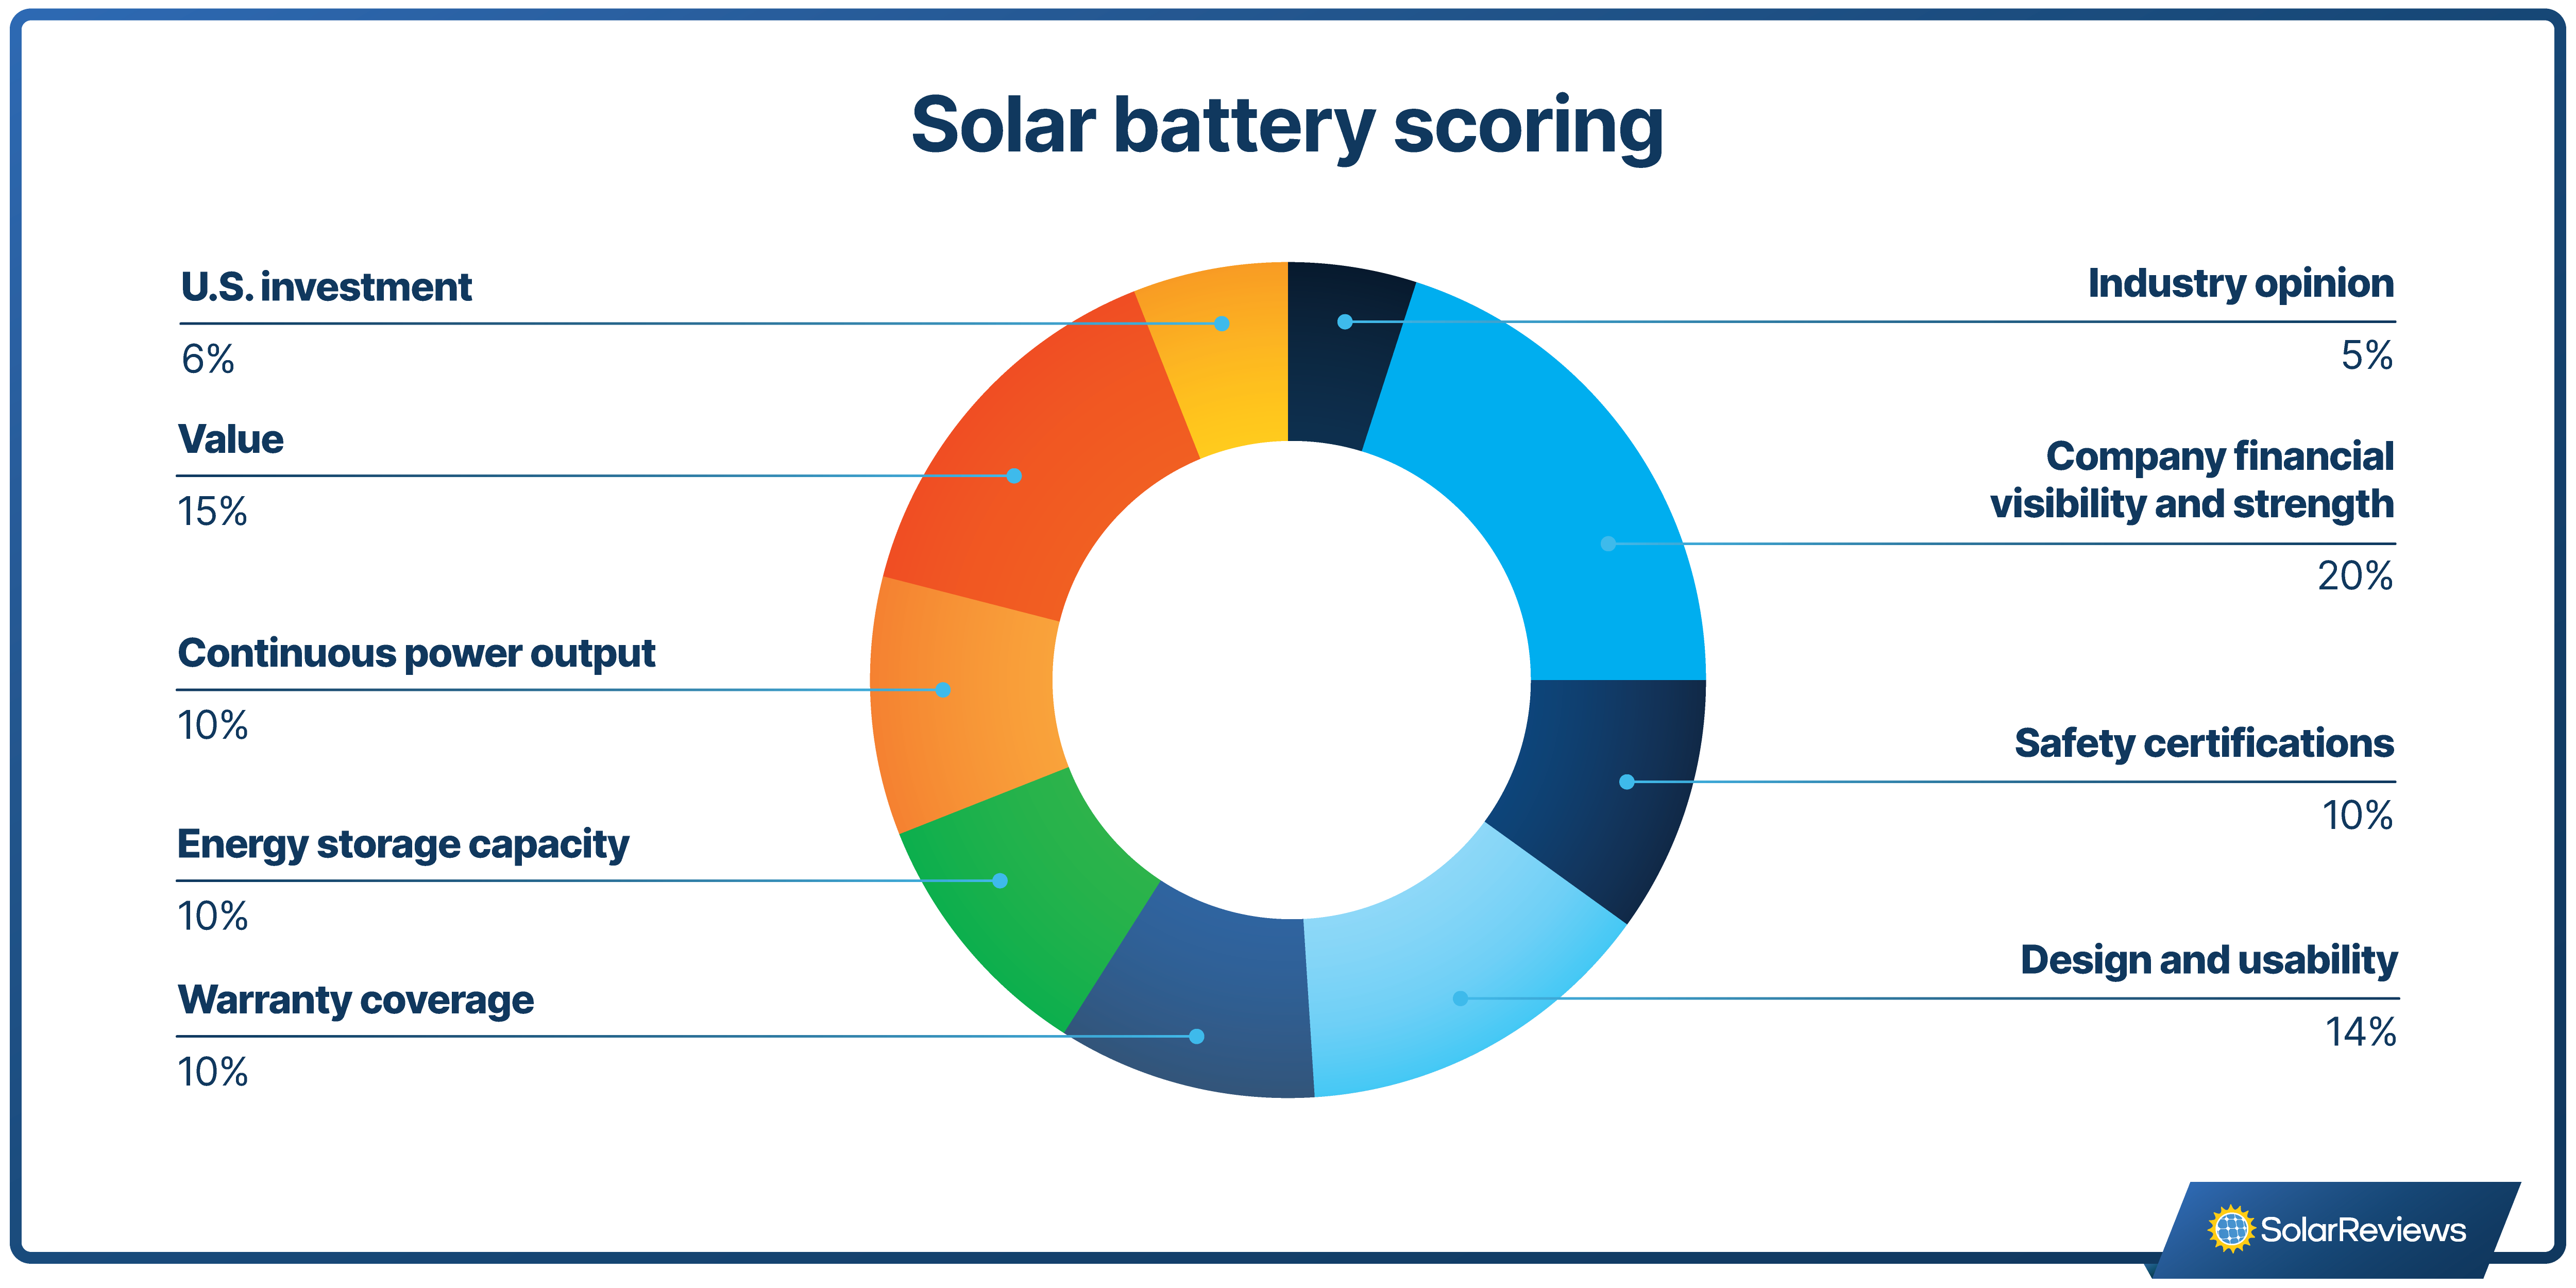 Ring chart showing the proportions of the total solar battery brand score that each factor represents